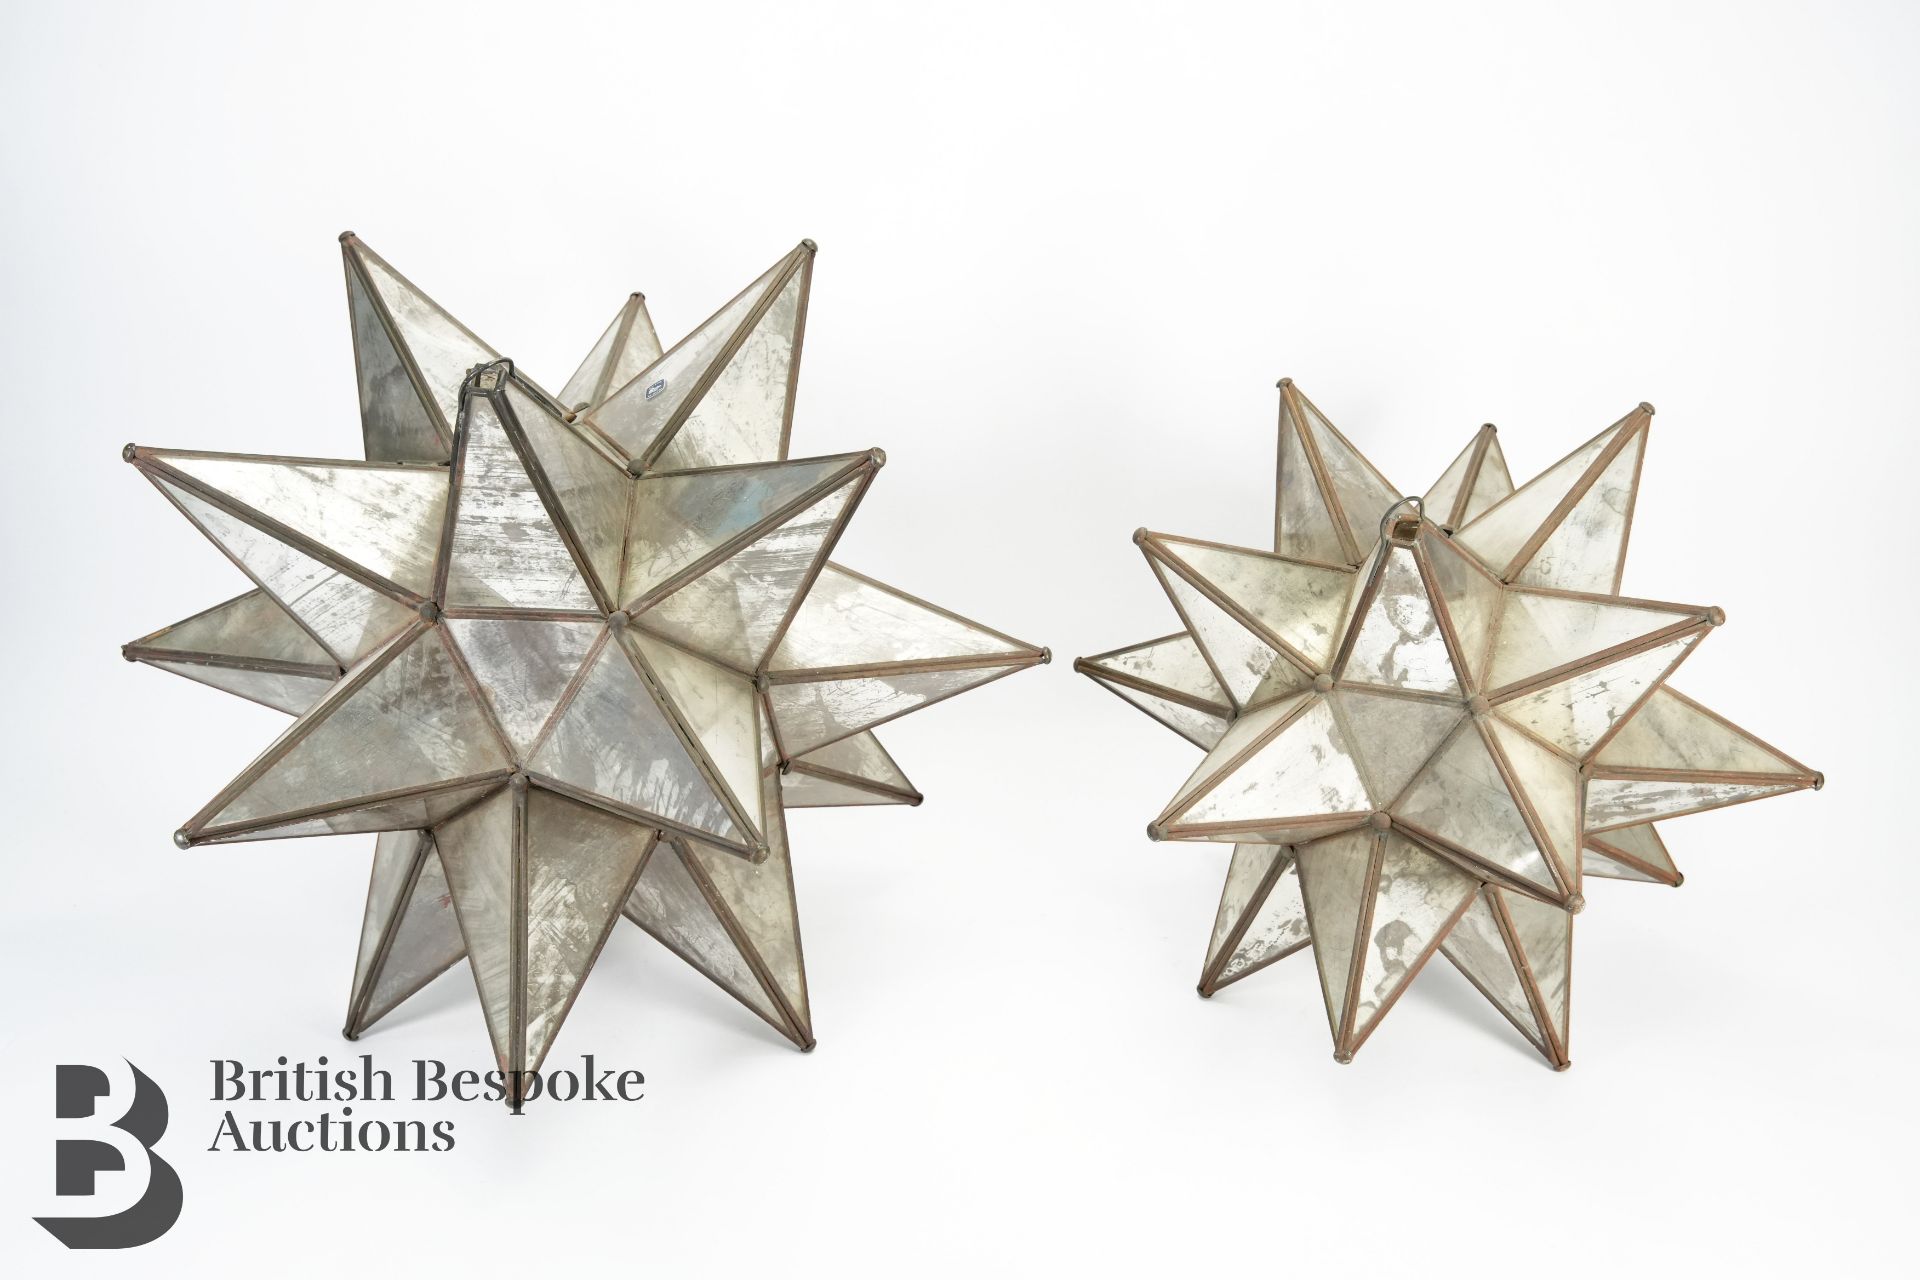 Two Mexican Frosted Glass Star Pendant Lamp Shades